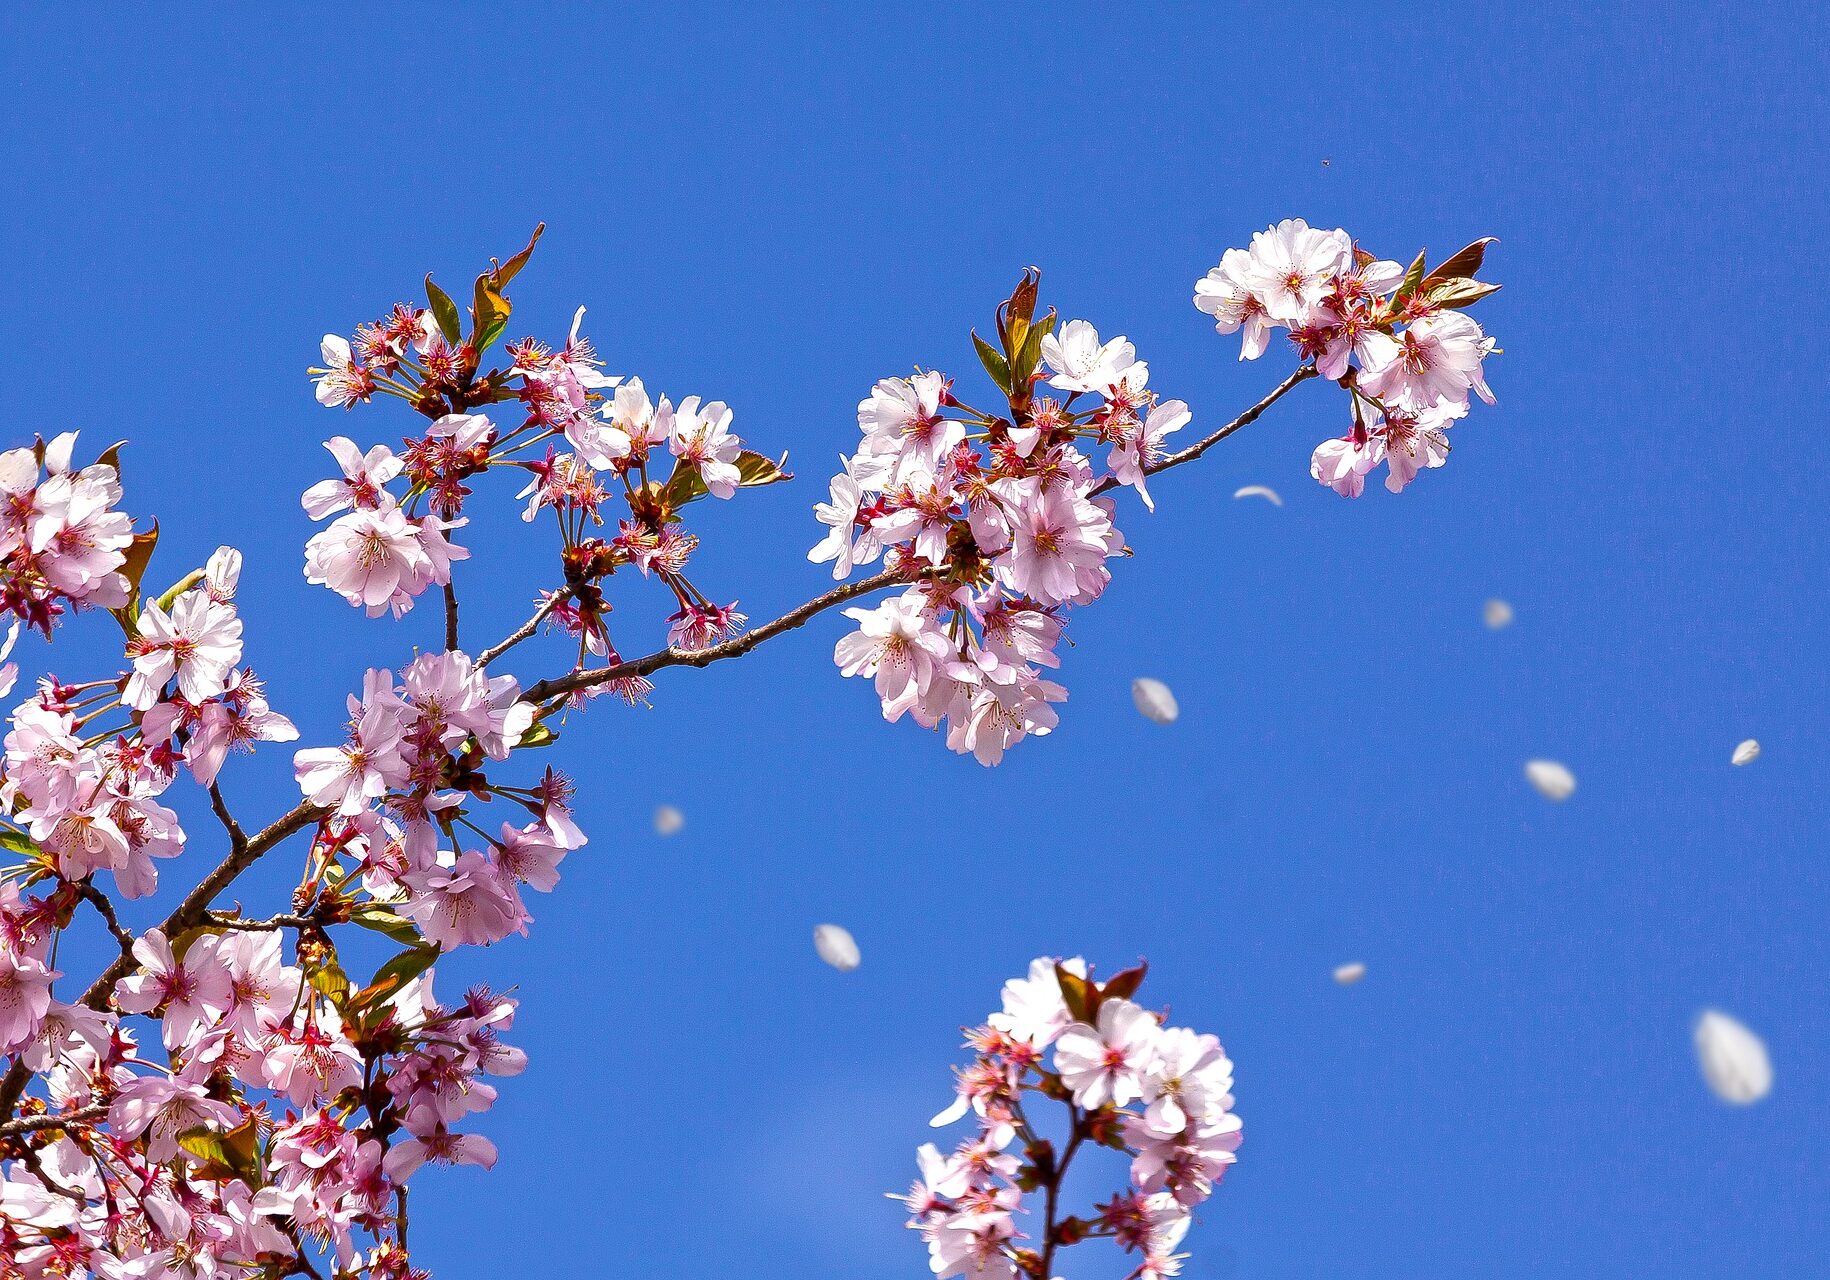 A tree branch with pink flowers in the sky.